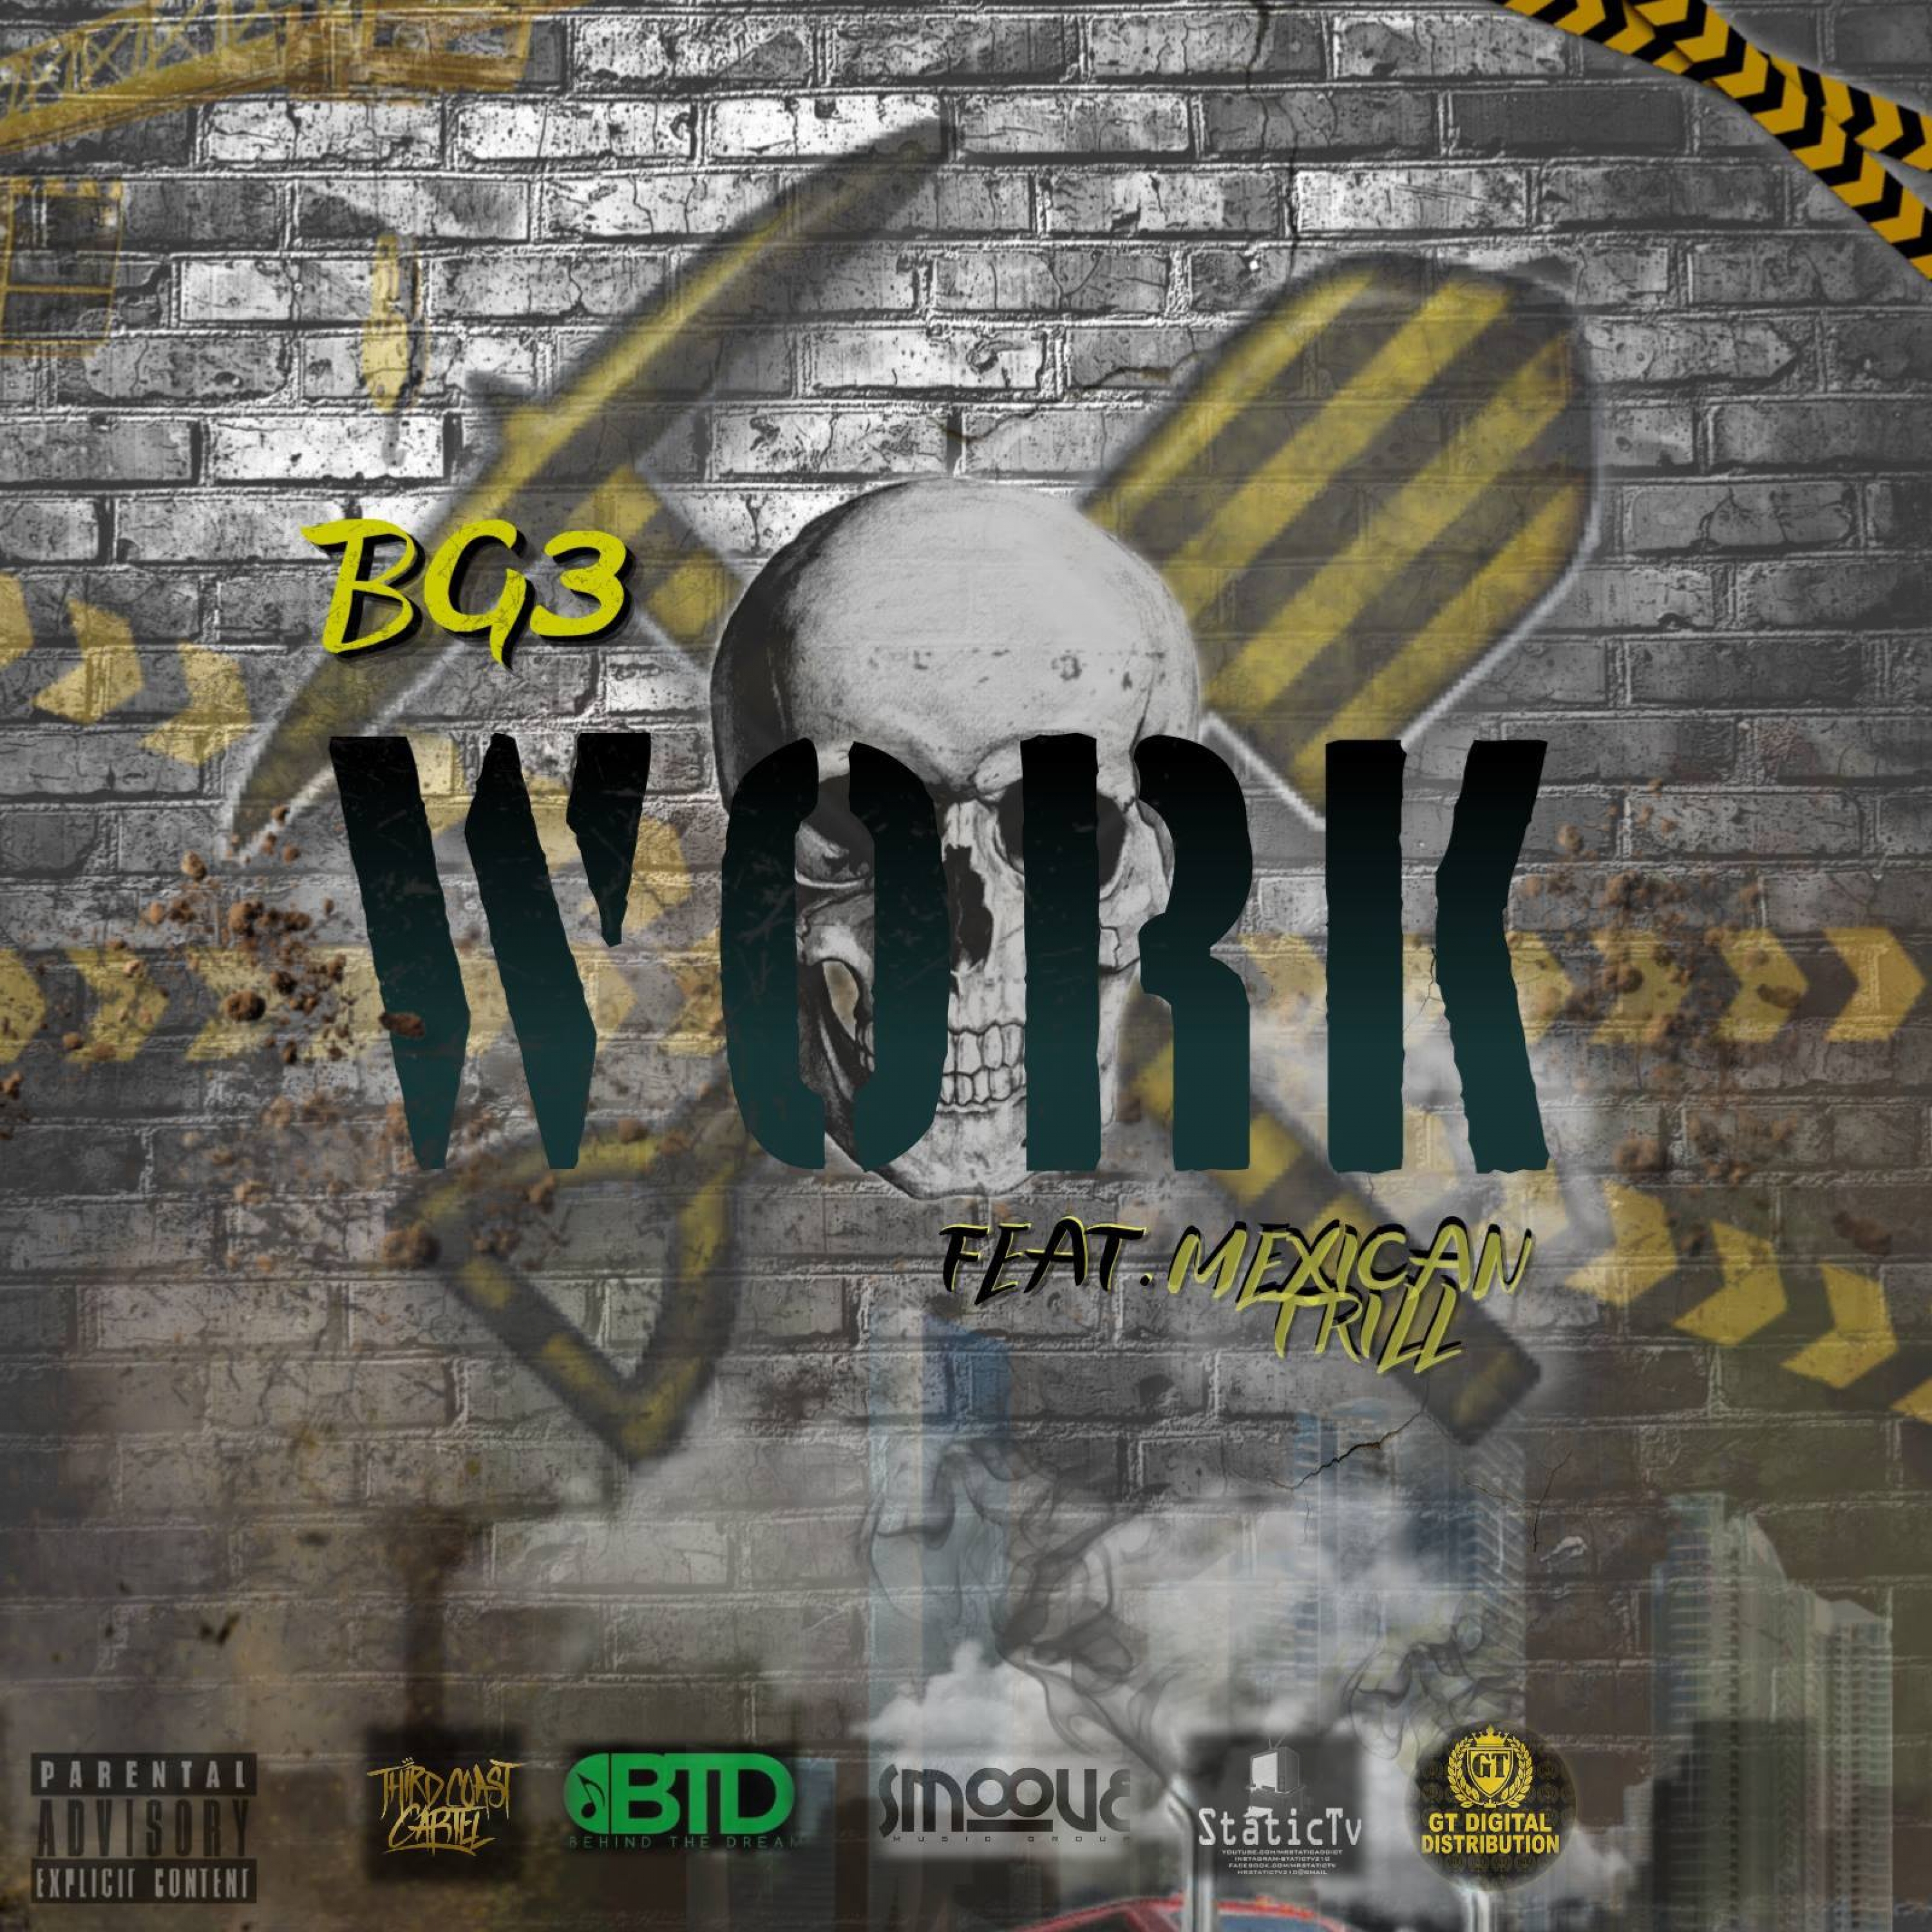 Work (feat. Mexican Trill)